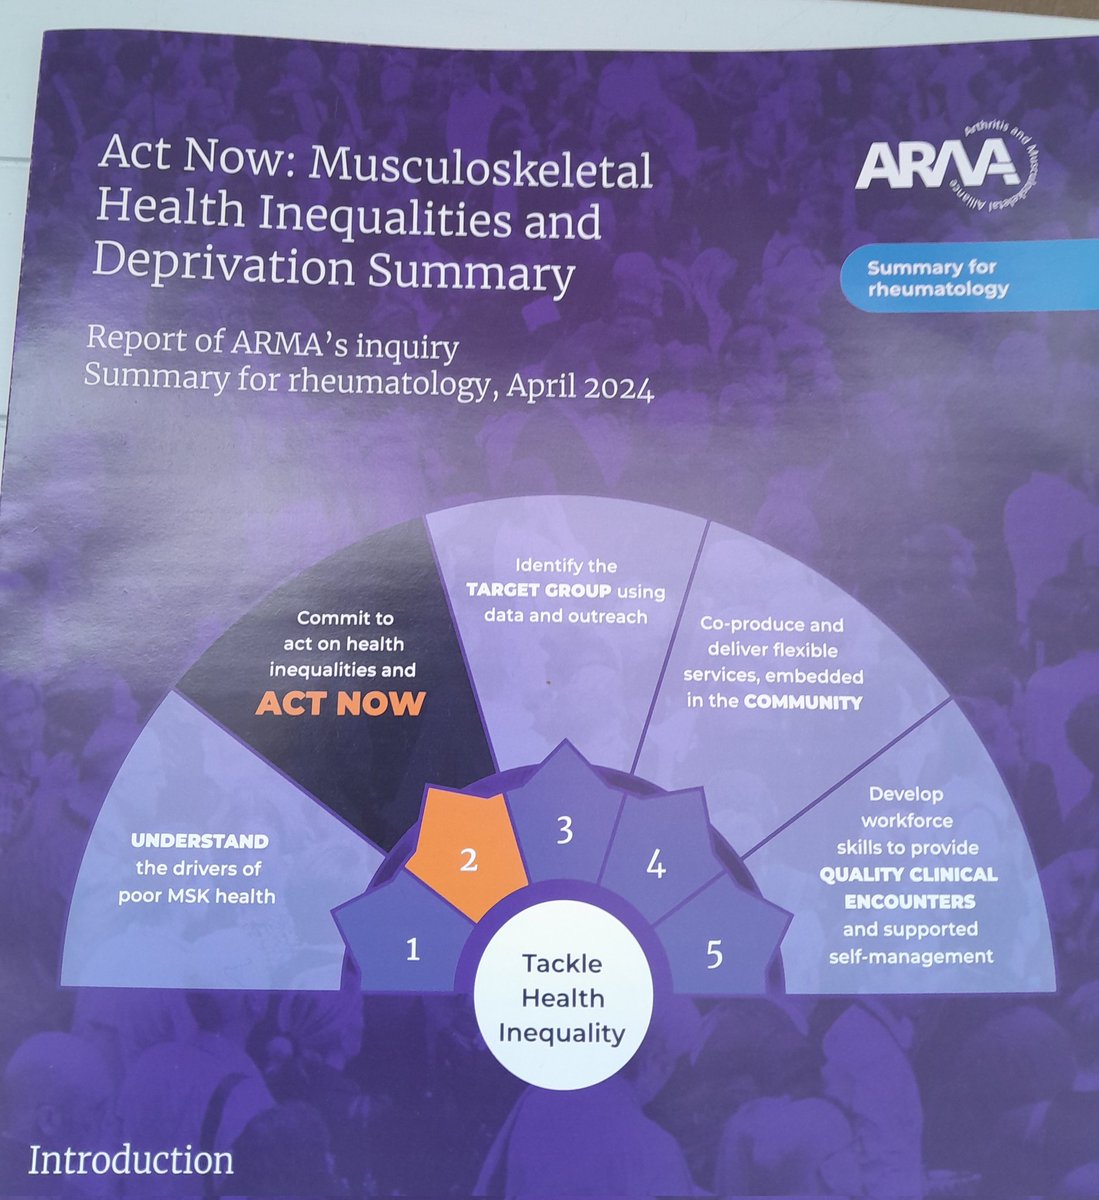 Just arrived and ready for #BSR24 print copies of @WeAreARMA Act Now summary for rheumatology. If you will be there you can get one from our stand. We can all do something about #MSKInequalities. arma.uk.net/msk-health-ine…